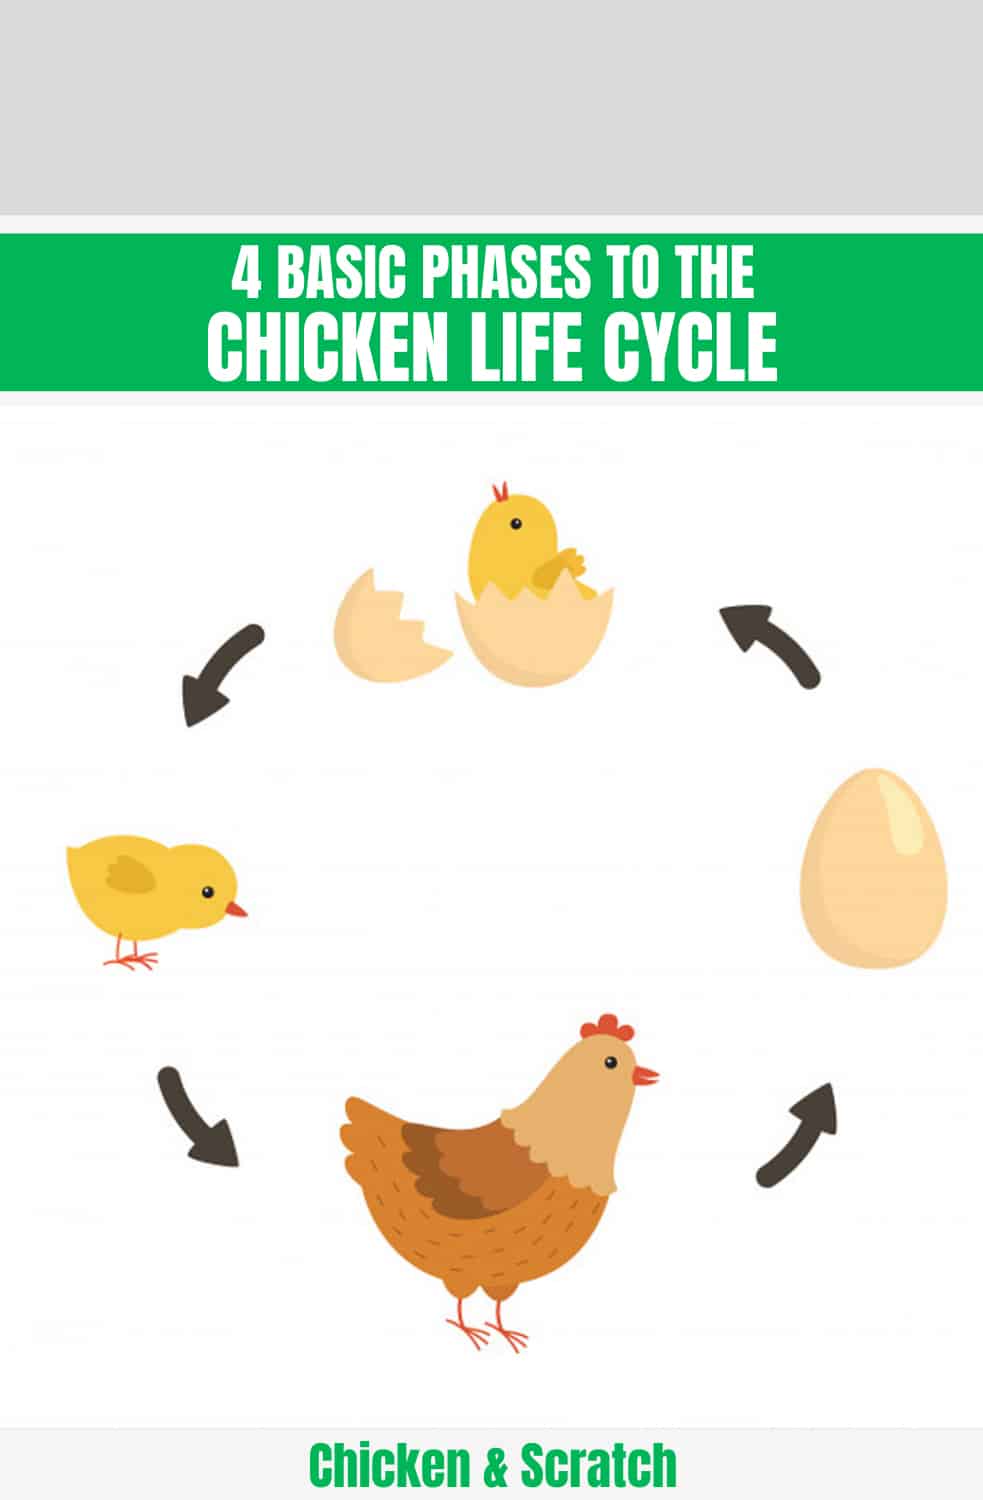 4 Basic Phases to the Chicken Life Cycle